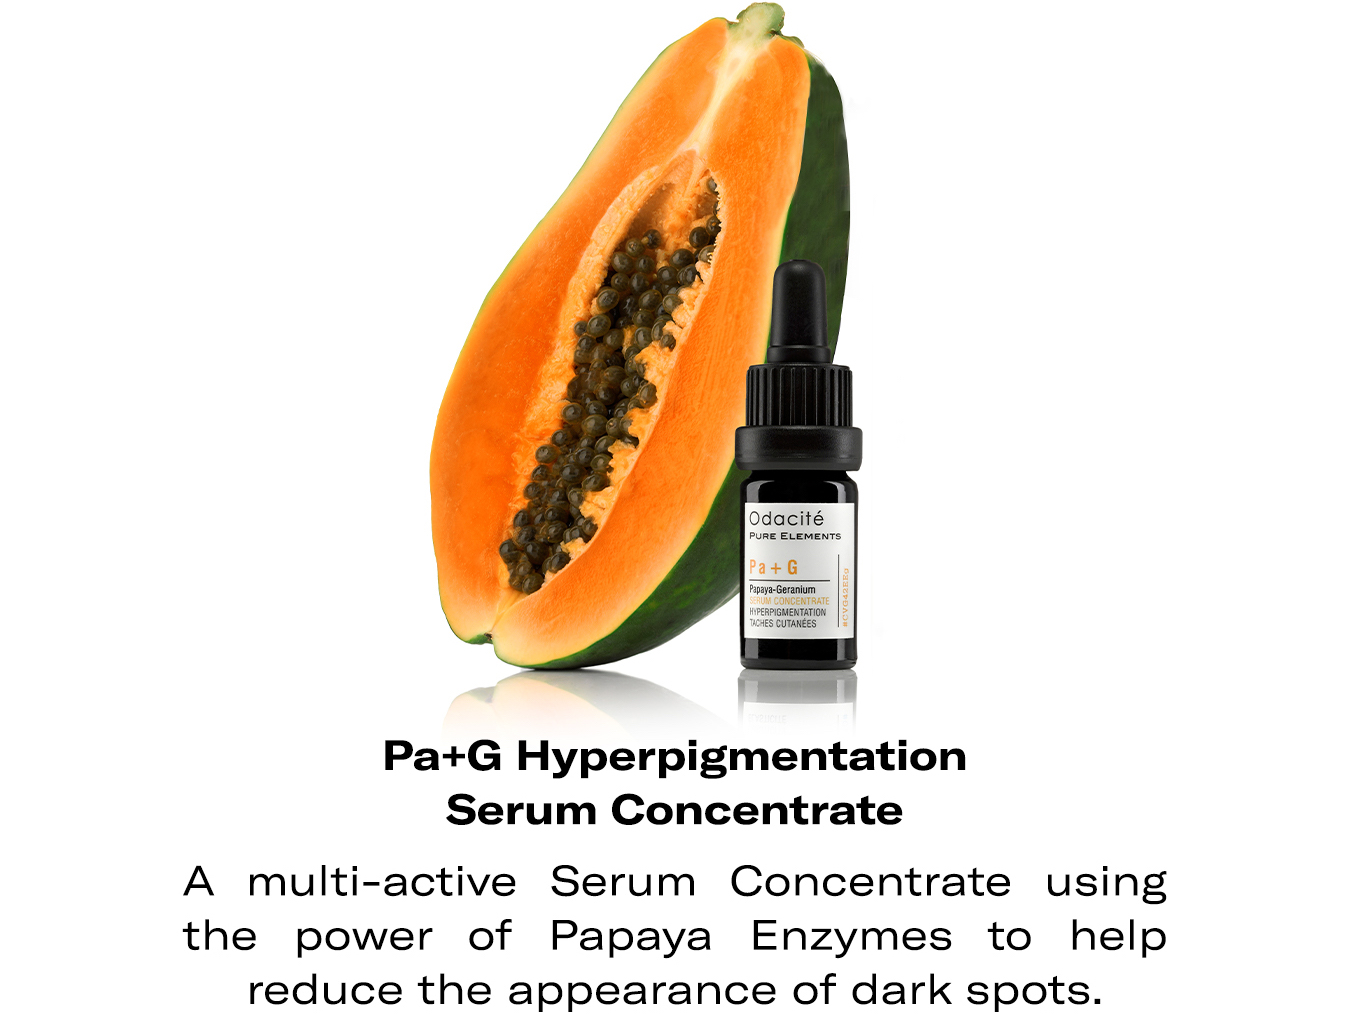 Pa+G Hyperpigmentation Serum Concentrate